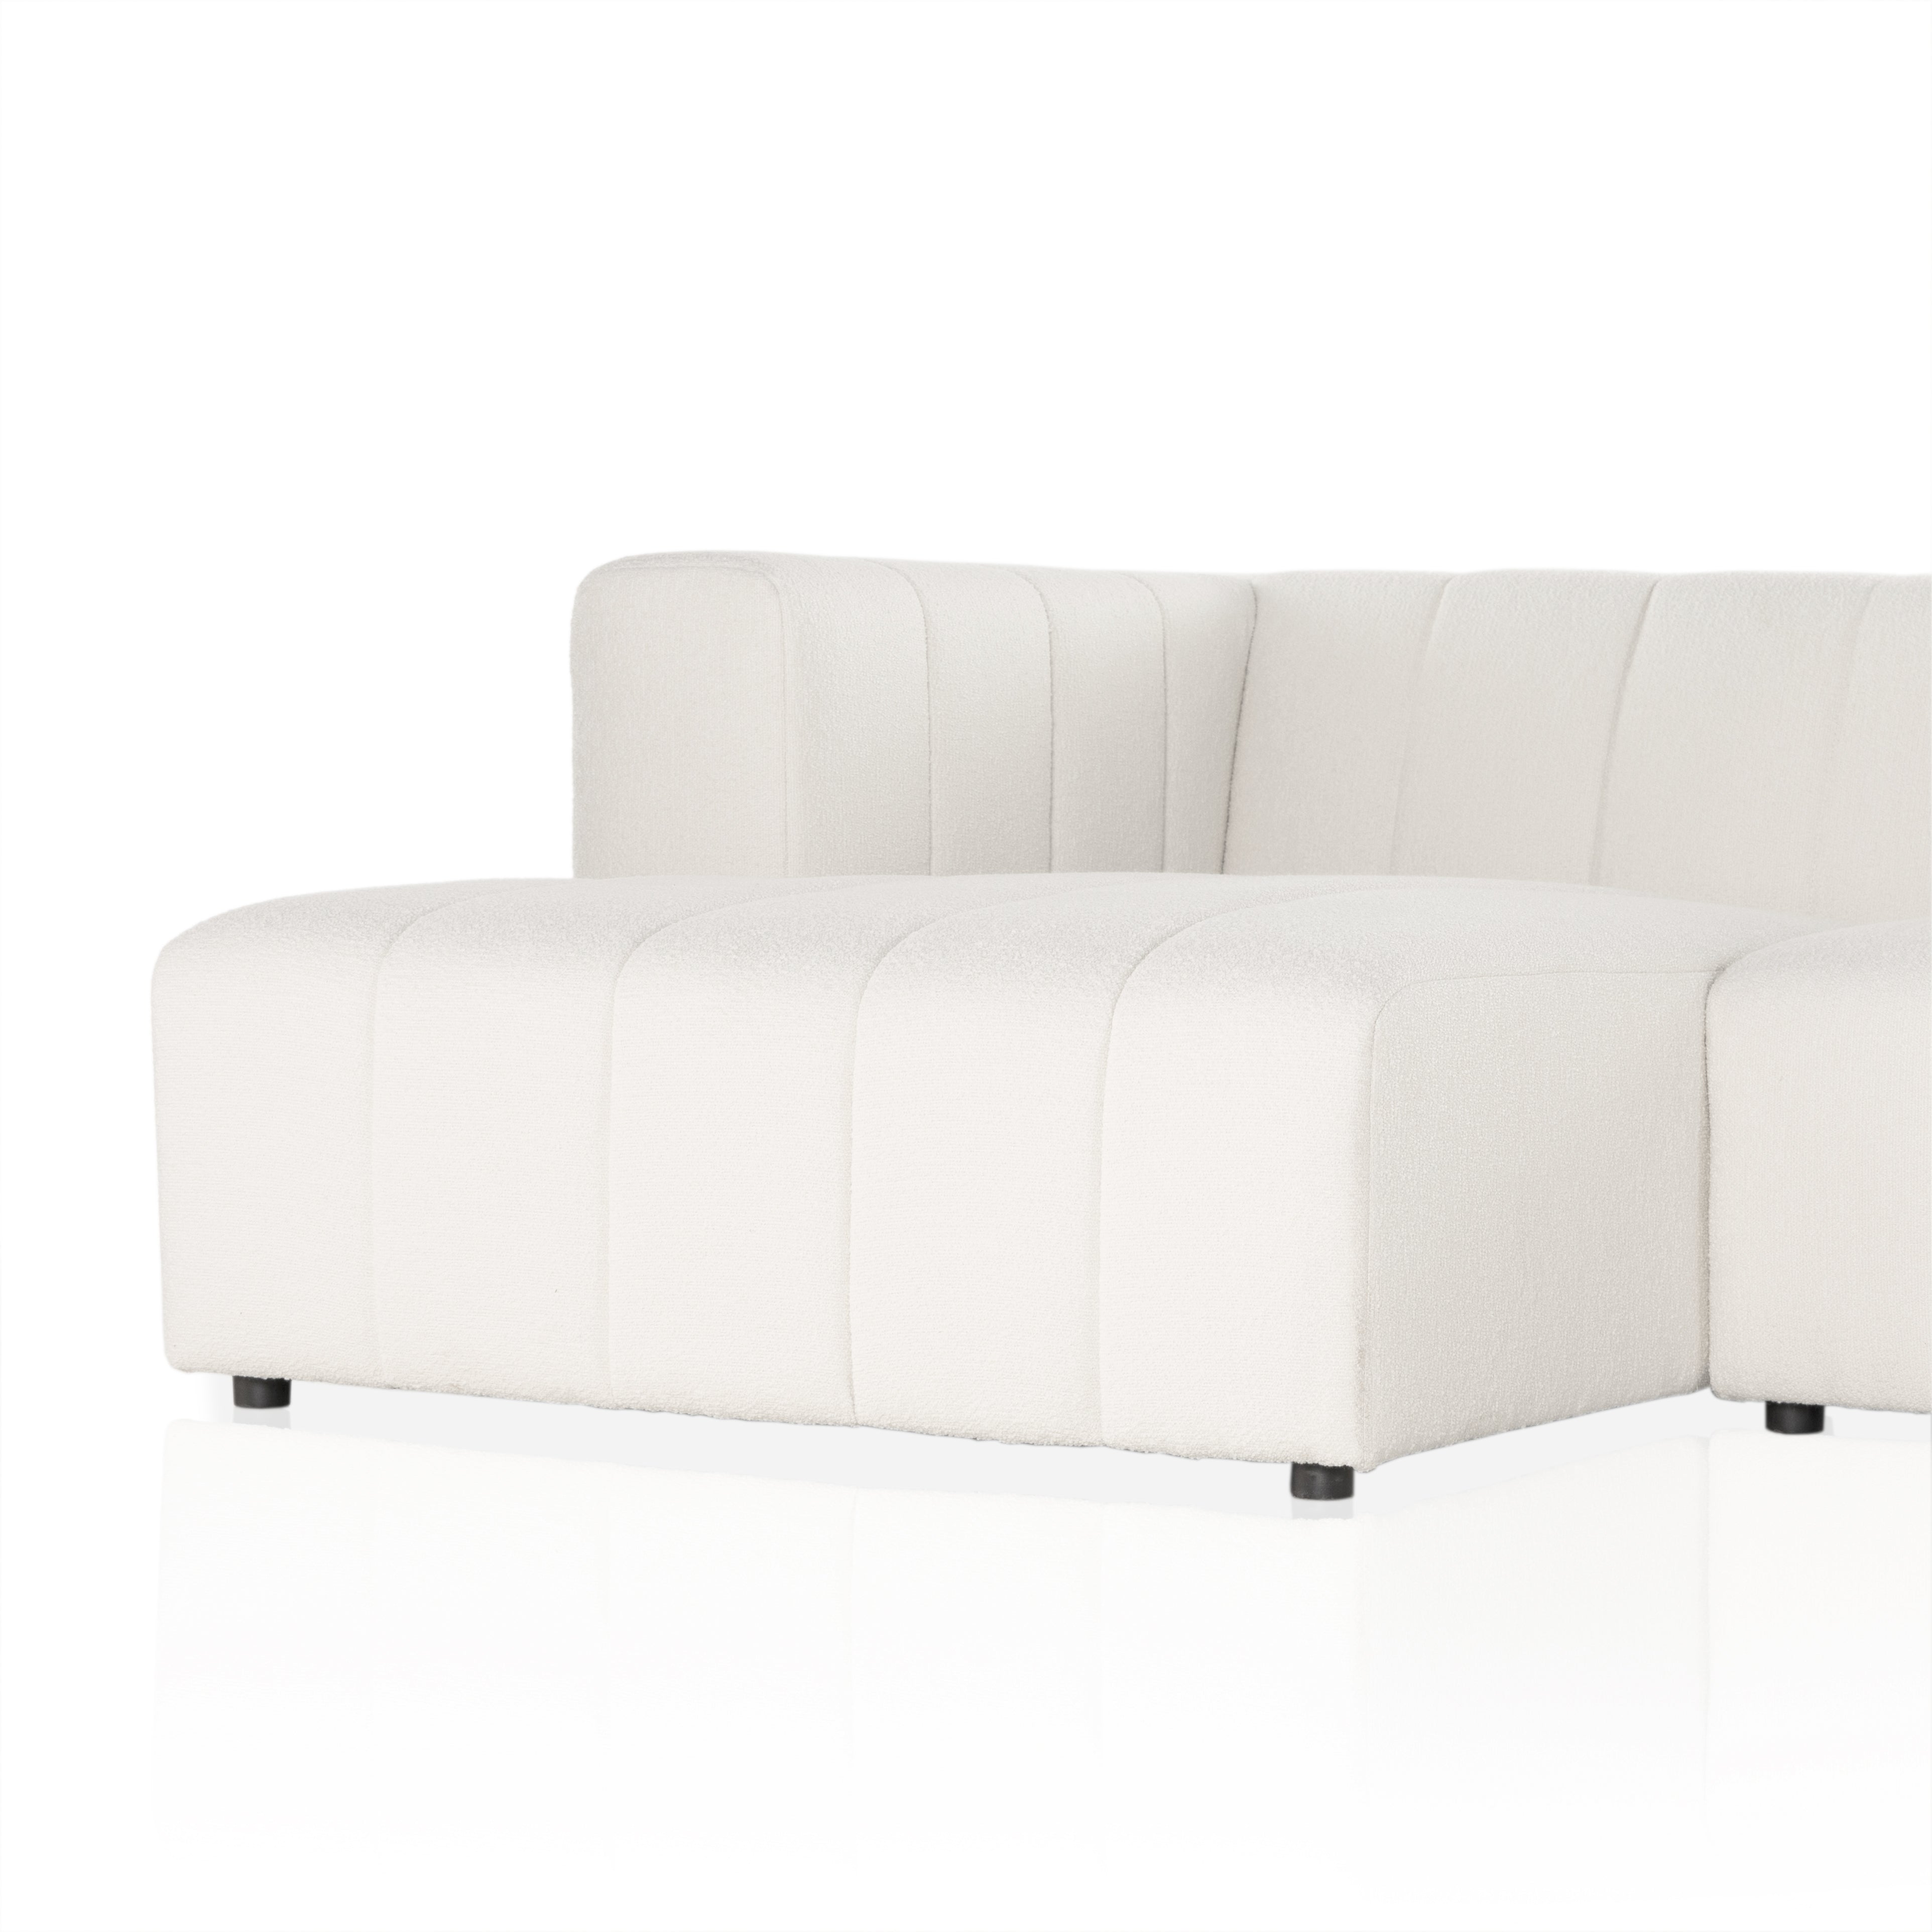 Langham Channeled 4-piece Sectional